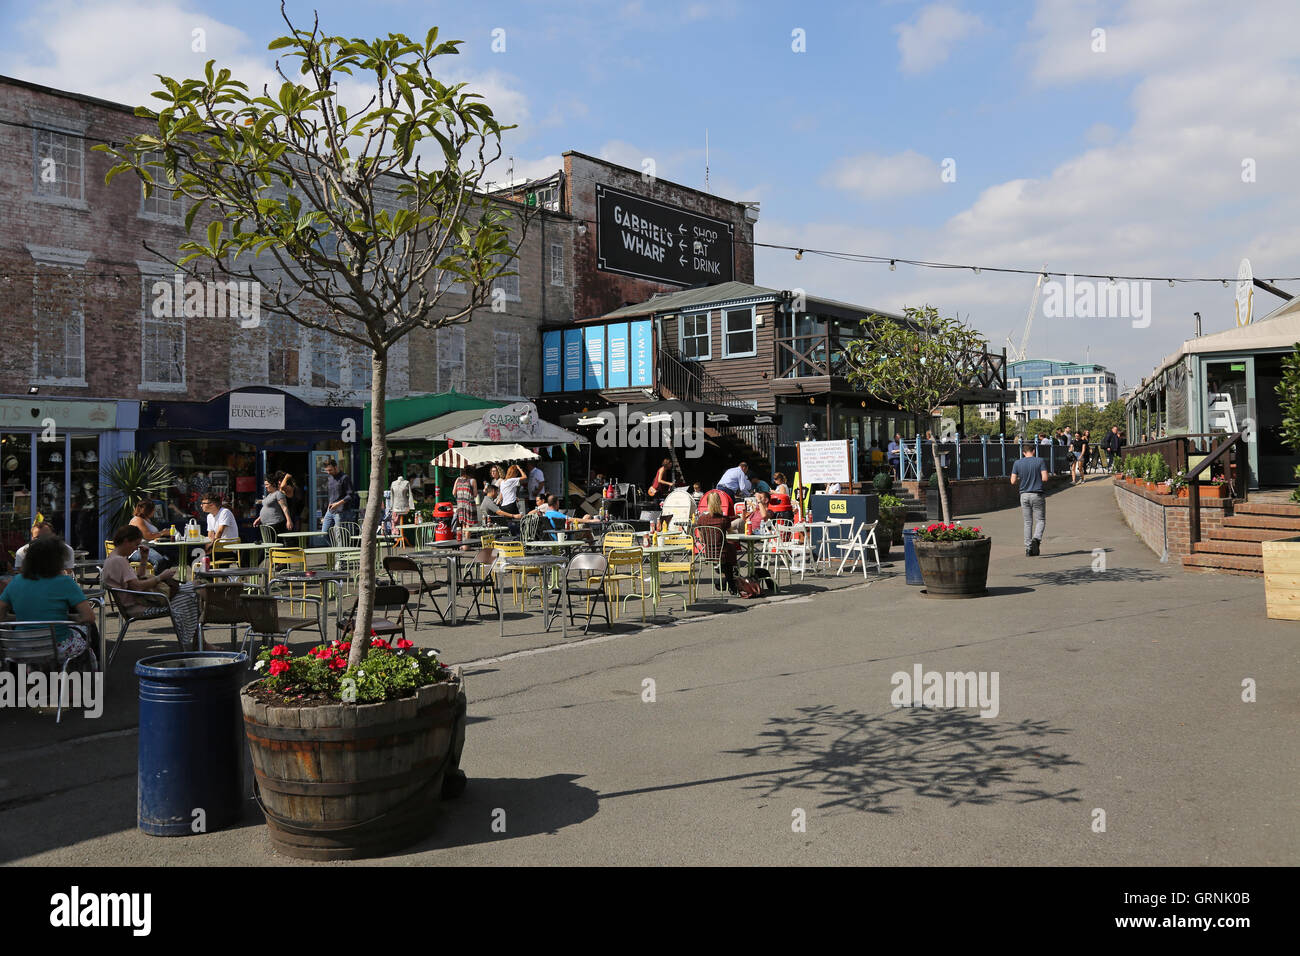 Gabriel's Wharf on London's South Bank. An area of small shops and restaurants, part of the Coin Street community redevelopment Stock Photo